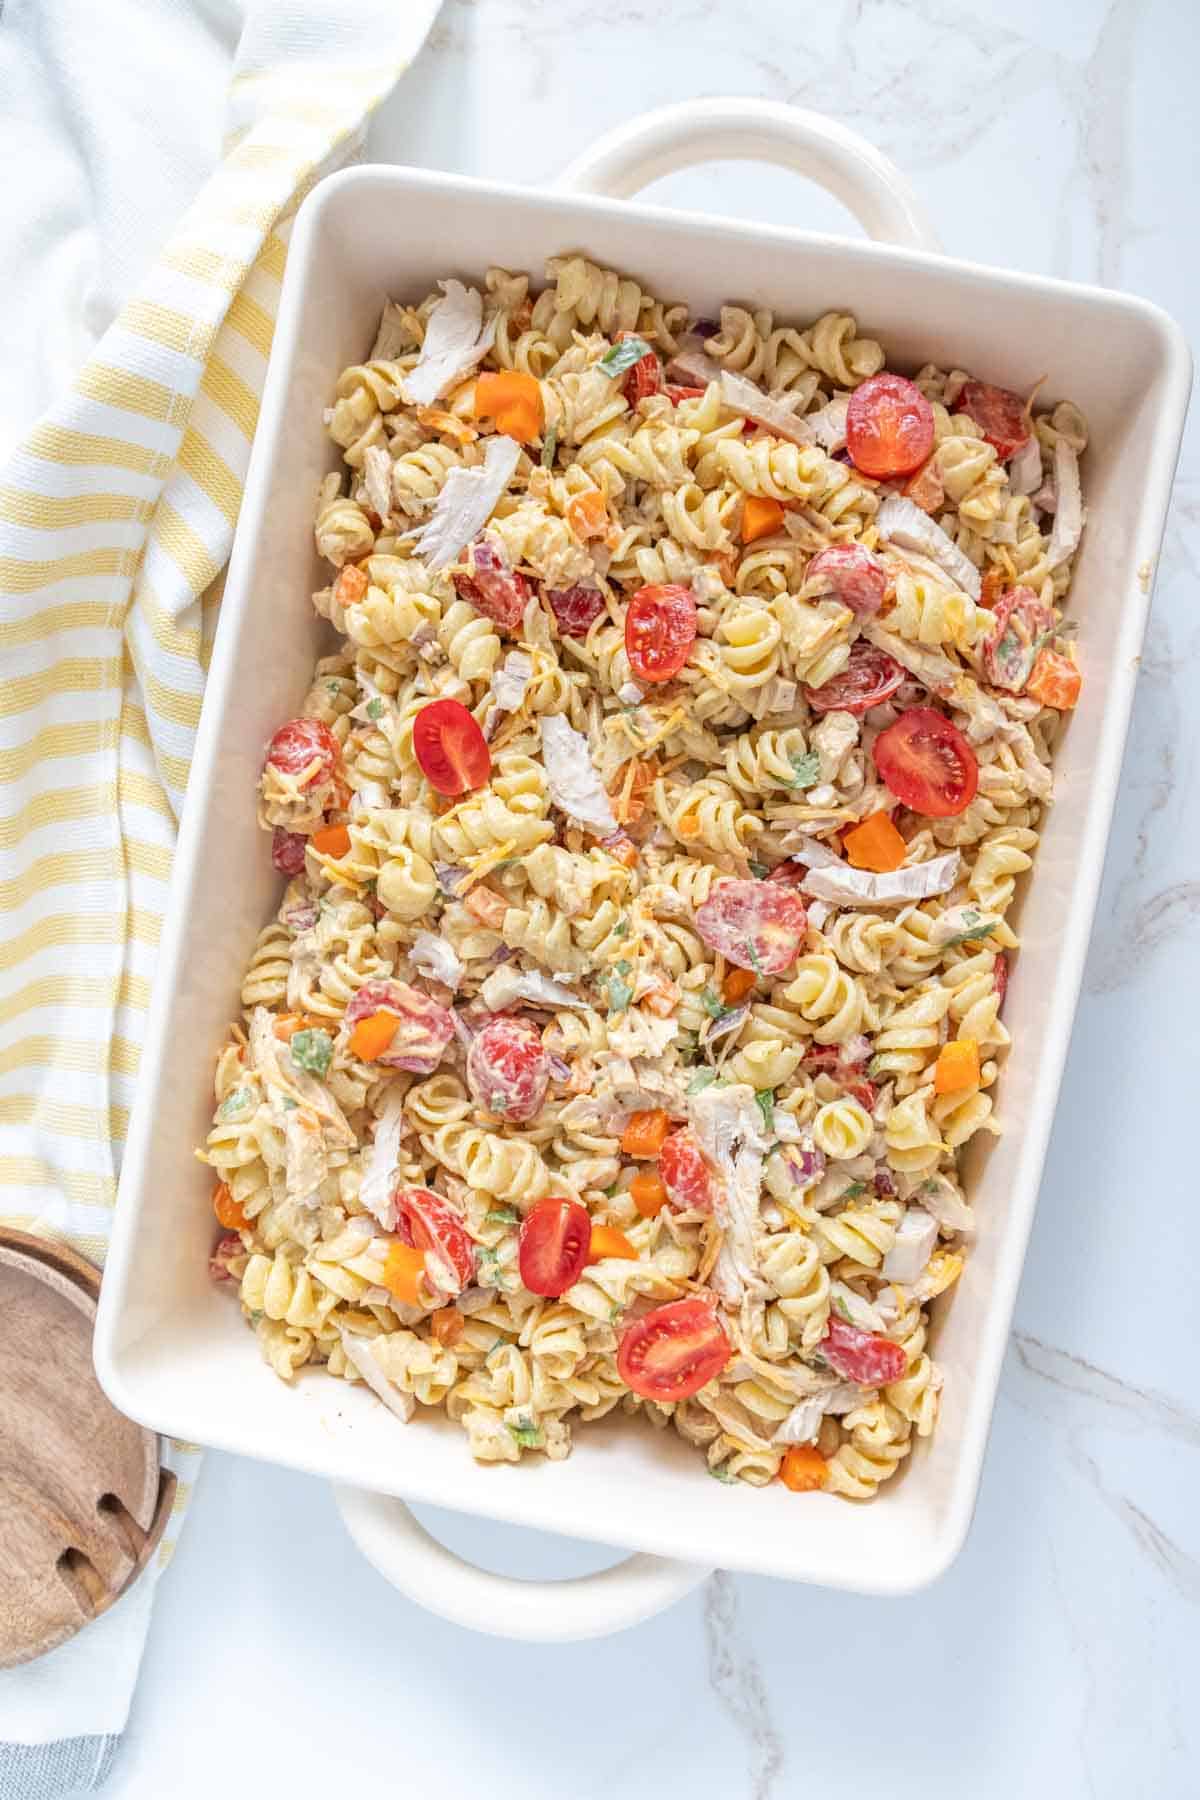 A rectangular dish of rotini pasta salad with sliced cherry tomatoes, shredded chicken, and a variety of chopped vegetables on a marble surface. A yellow and white striped cloth is beside the dish.